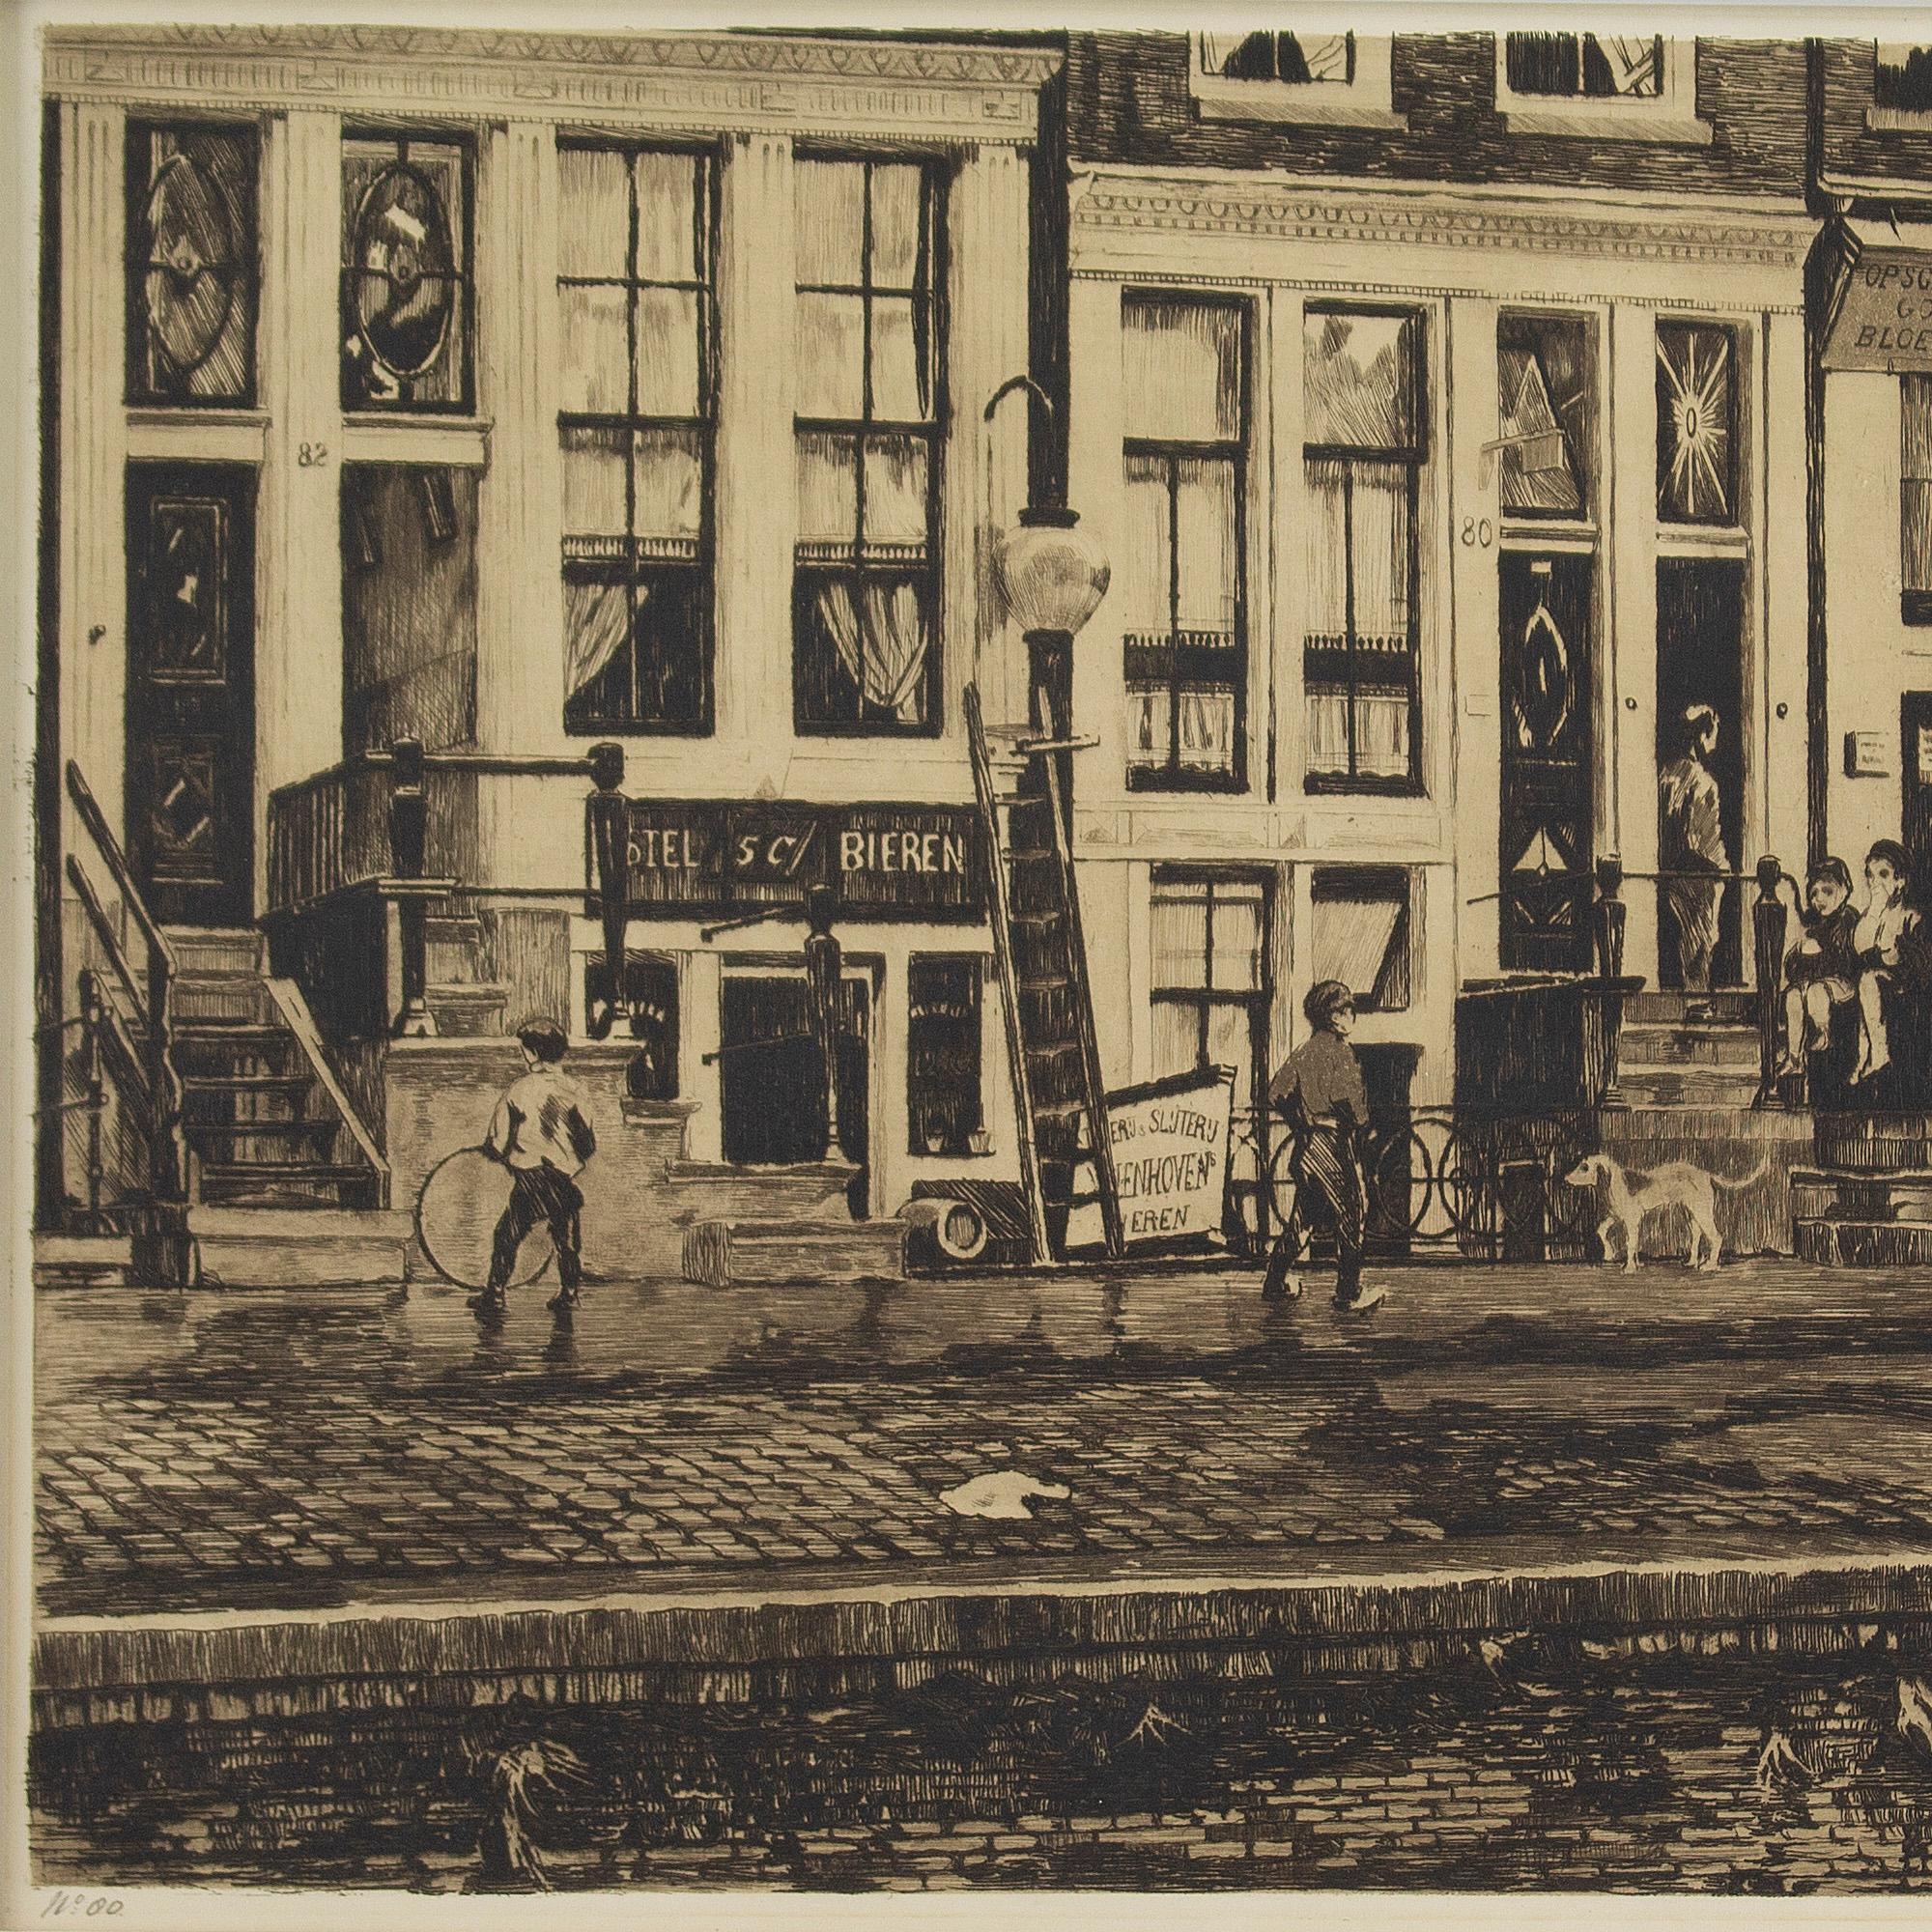 Willem Witsen, Oude Waal, Amsterdam, Etching 2